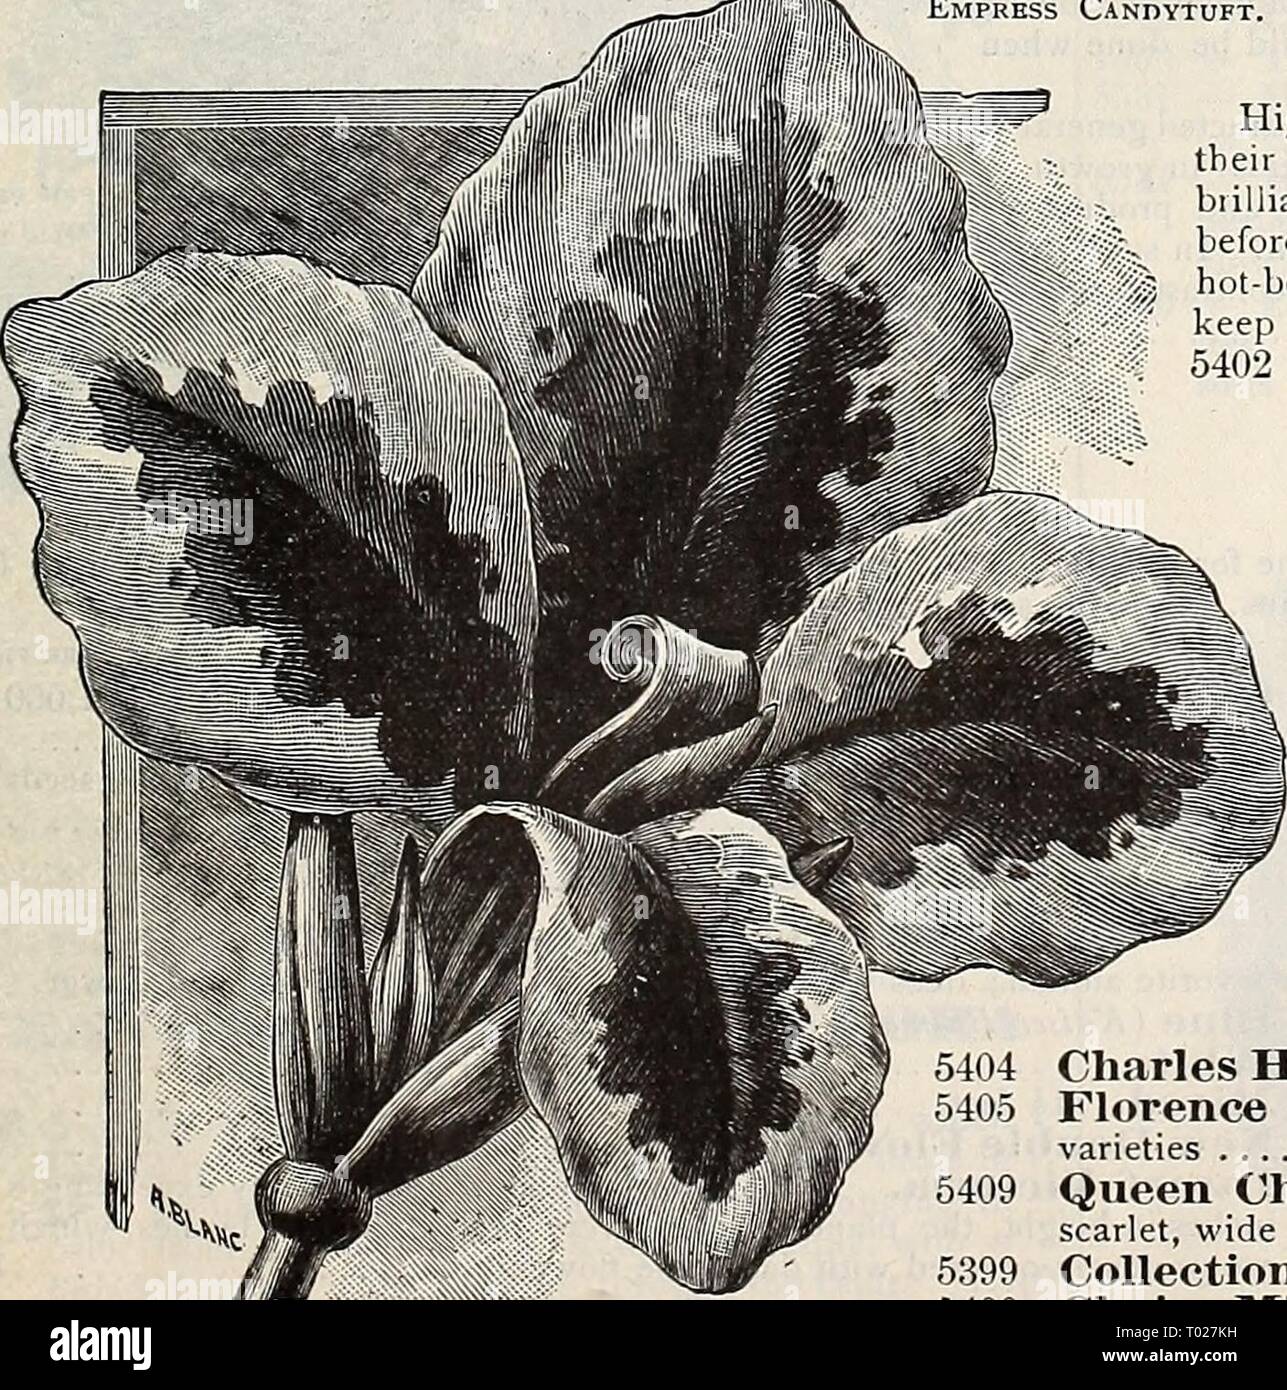 Dreer's garden calendar : 1896 . dreersgardencale1896henr Year: 1896  Canterbury Bells. CANDYTUFT— Continued. PER PKT. 'White Fragrant. Per oz. 25 cts 5 White Rocket. Per oz. 25 cts 5 Mixed Colors. Peroz. 25cts. 5 Tom Thumb, White. 6 inches 5 Dwarf Hybrids, Mixed. 6 inches 10 HARDY PERENNIAL CANDYTUFTS. (Jveris.) Sempervirens. A profuse white blooming hardy perennial, adapted for rockeries, baskets, etc., coming in flower early in the spring; 1 foot 10 Gibraltarica Hybrida. Very fine species with white flow- ers, shading off' to lilac; 1 foot. 10 5381 5382 5390 5383 5387 5388 5379    CANNA. Ca Stock Photo